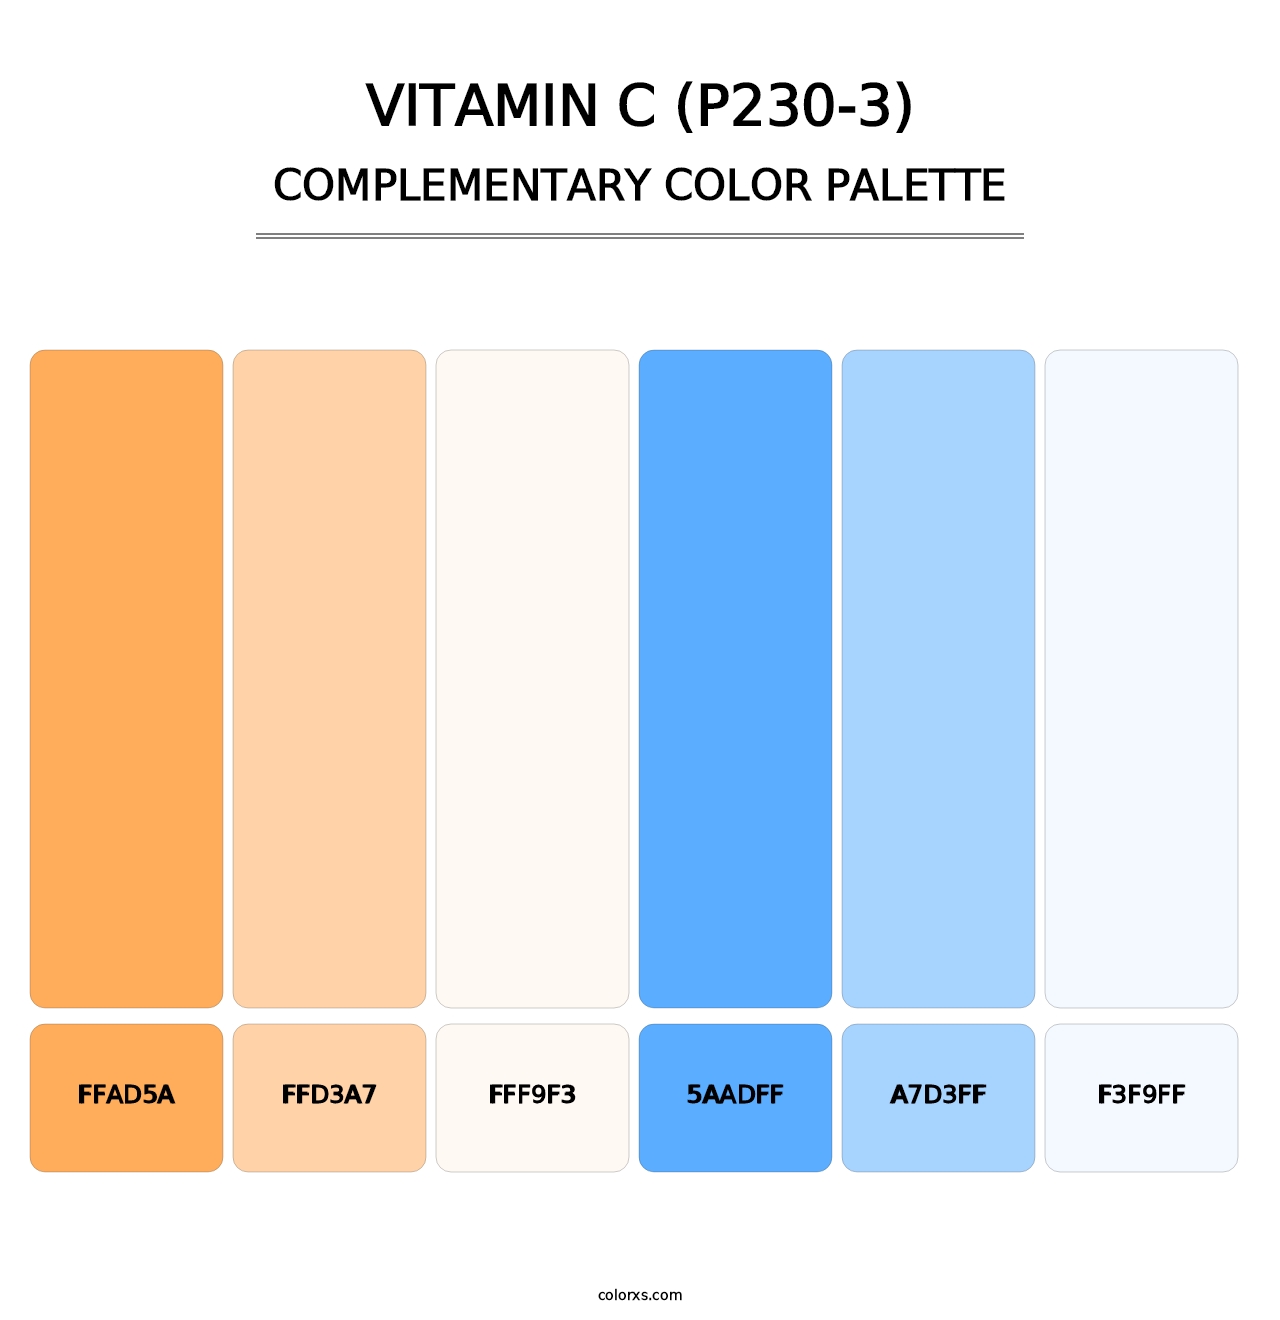 Vitamin C (P230-3) - Complementary Color Palette